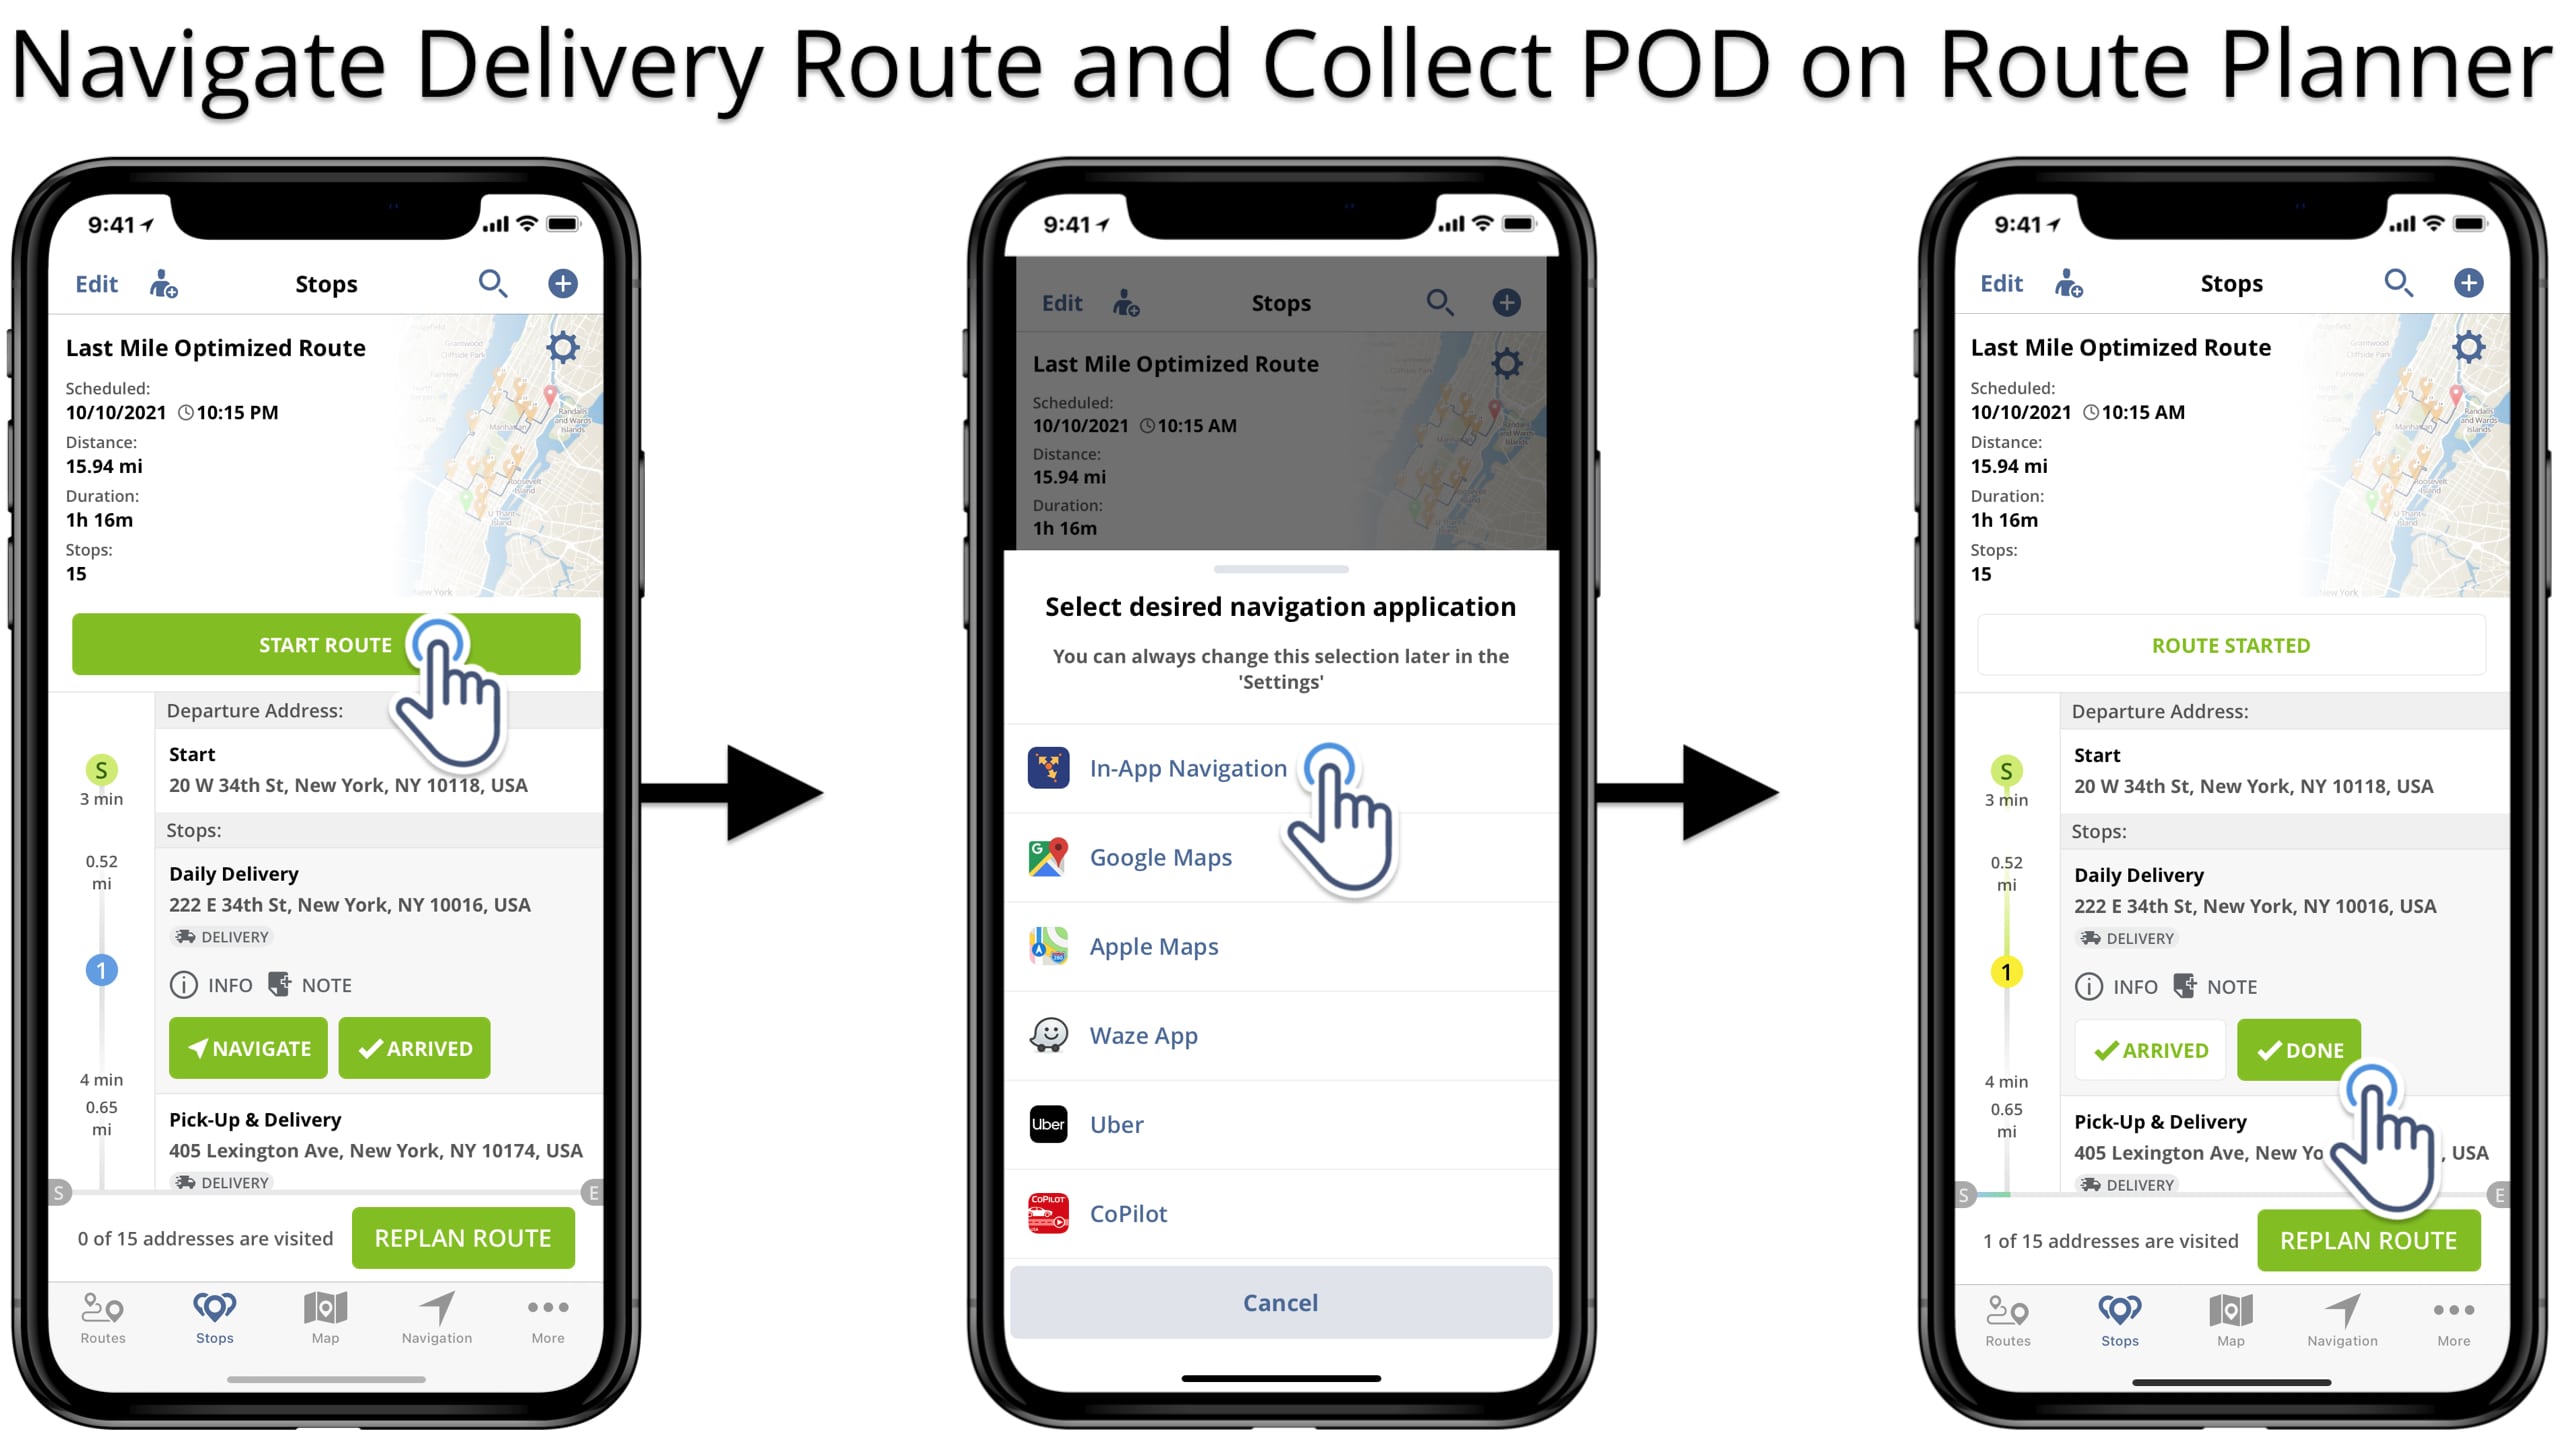 Navigate the planned route and collect electronic proof of delivery on iPhone route planner app.